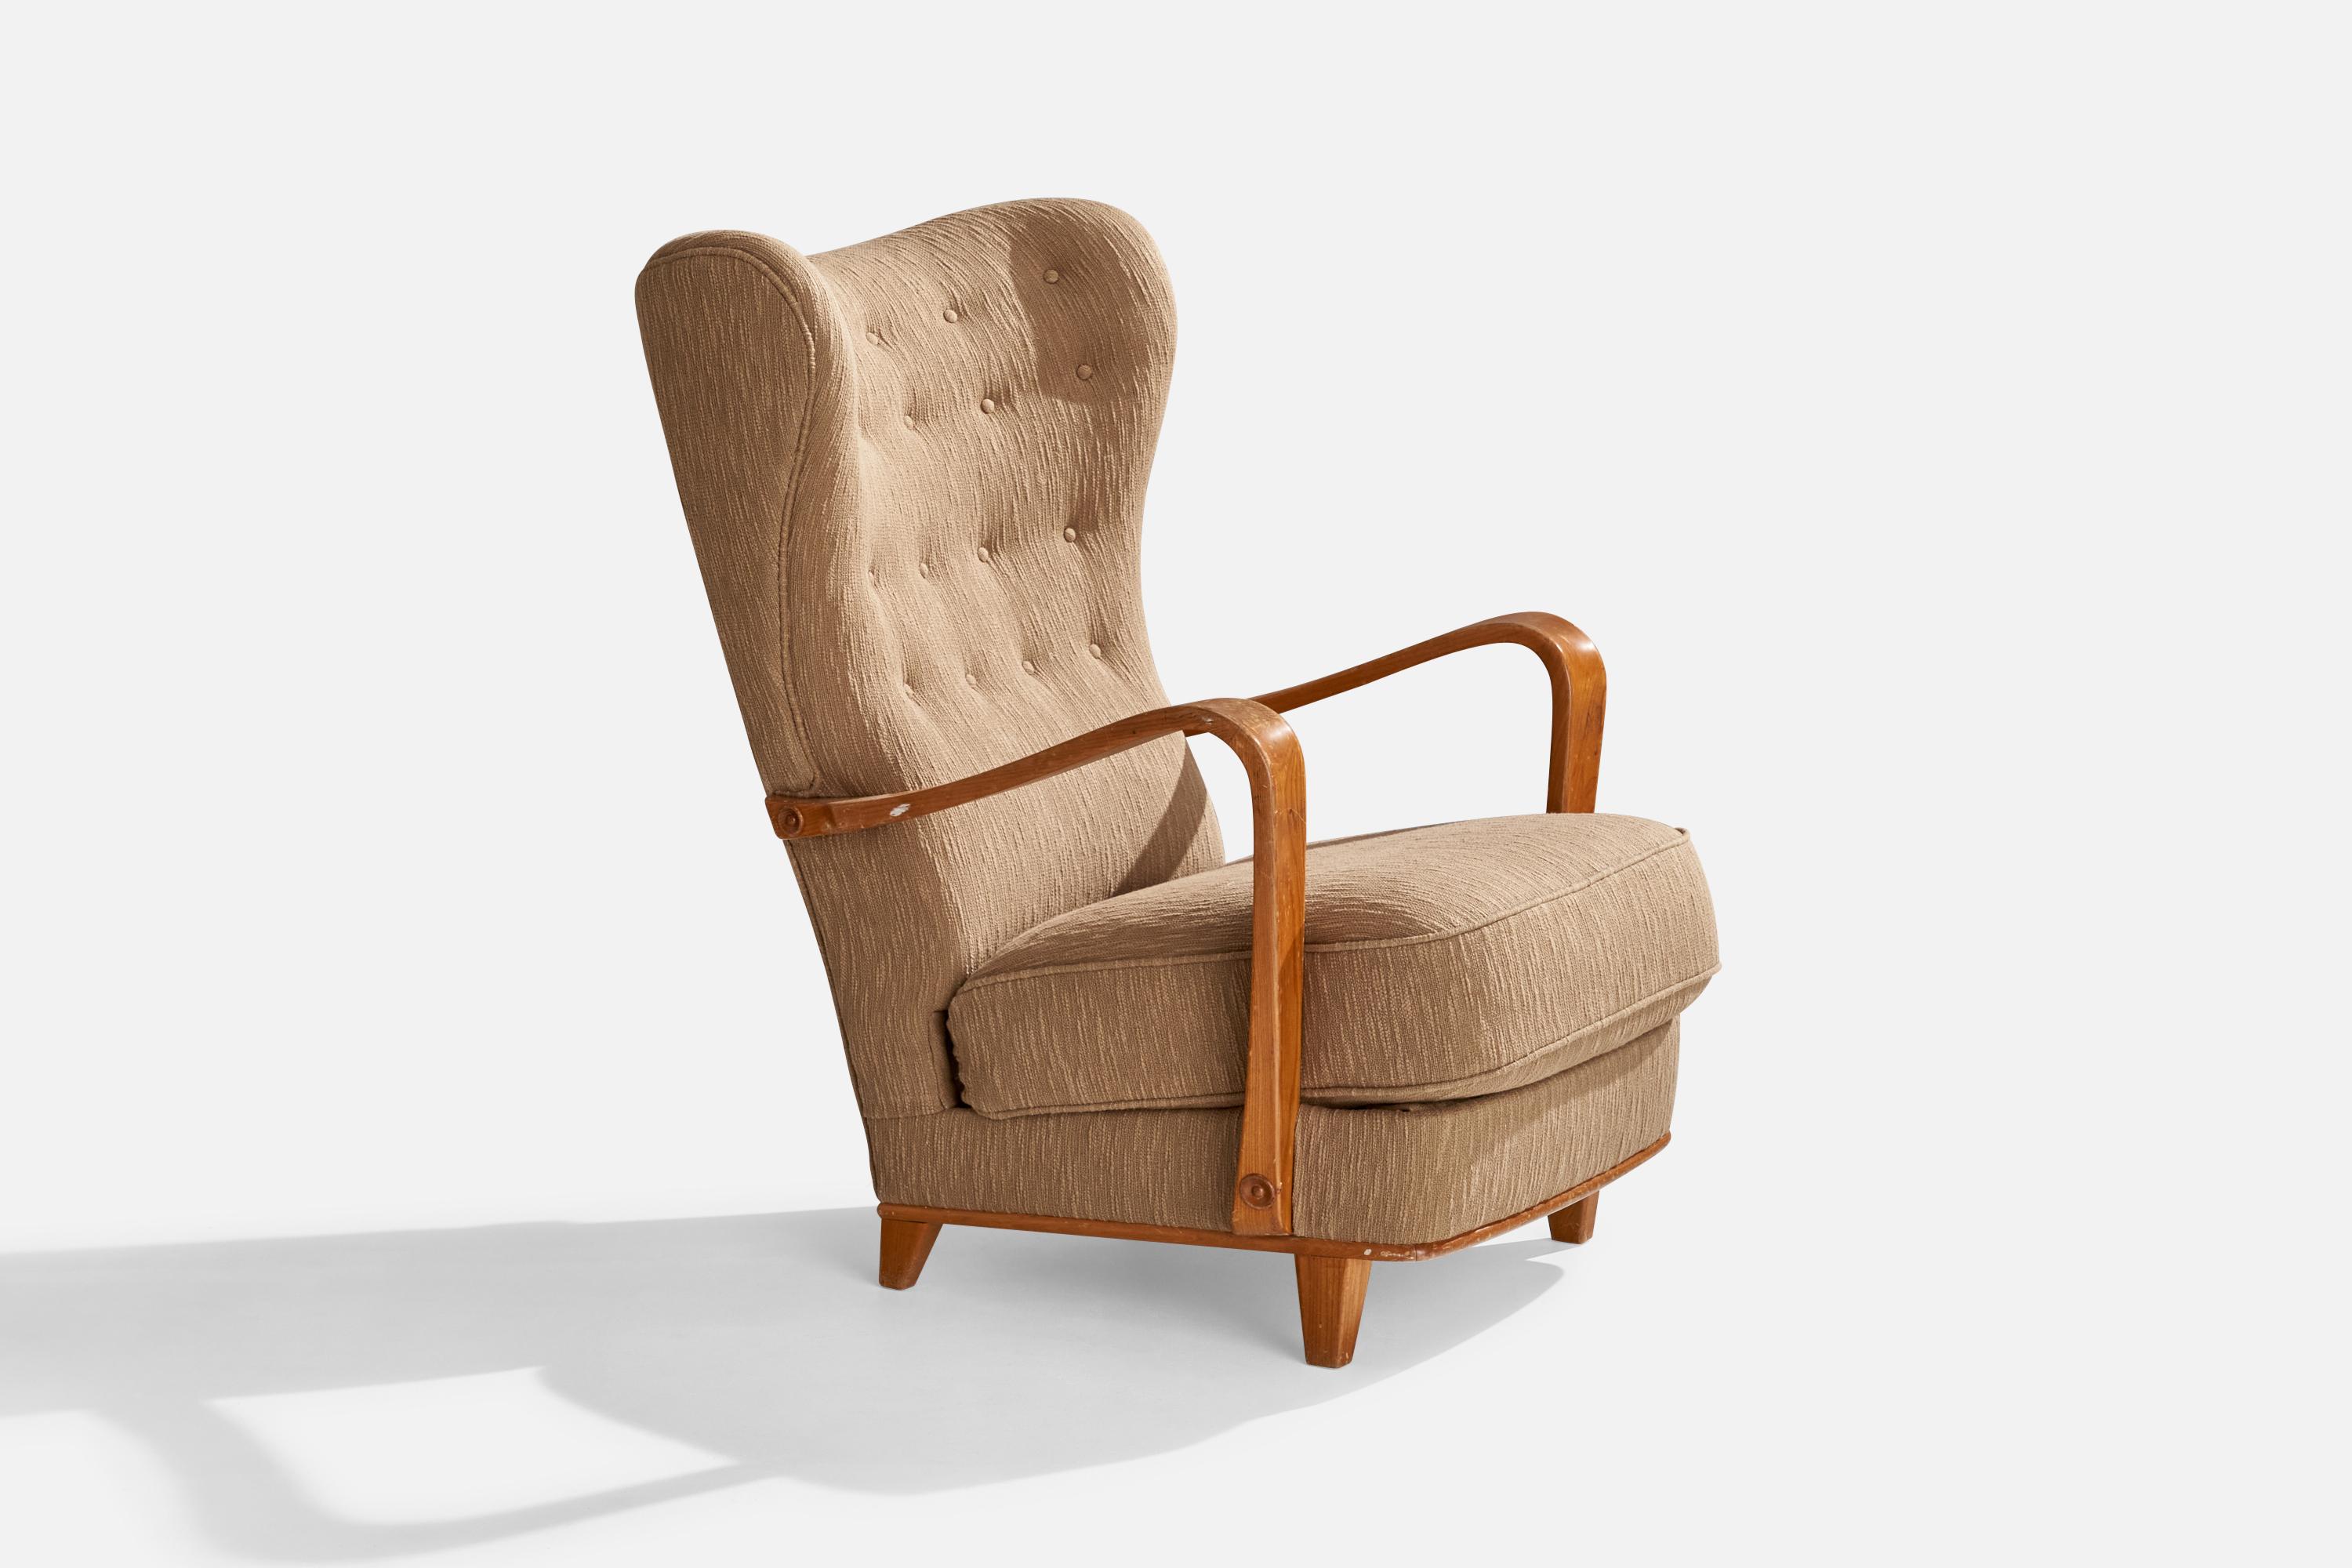 An elm and brown fabric lounge chair produced by Gemla Diö, Sweden, c. 1940s.

Seat height: 18”